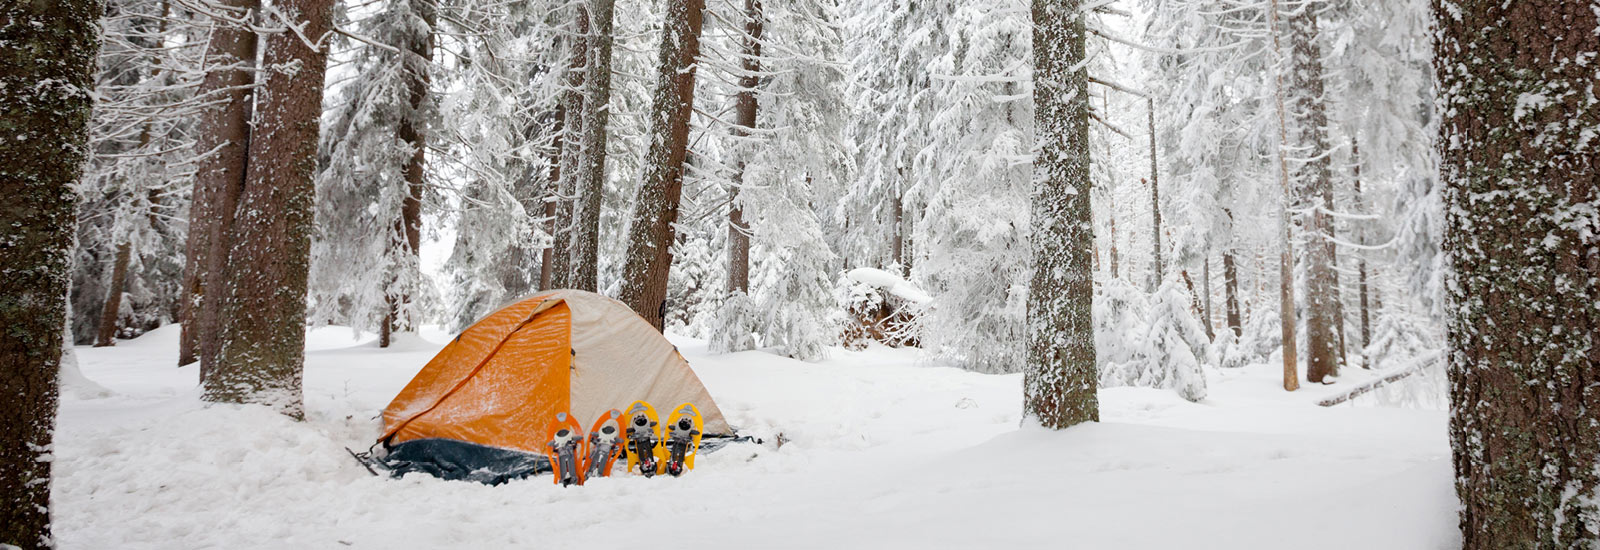 Gear up for your camping and hiking winter adventures.